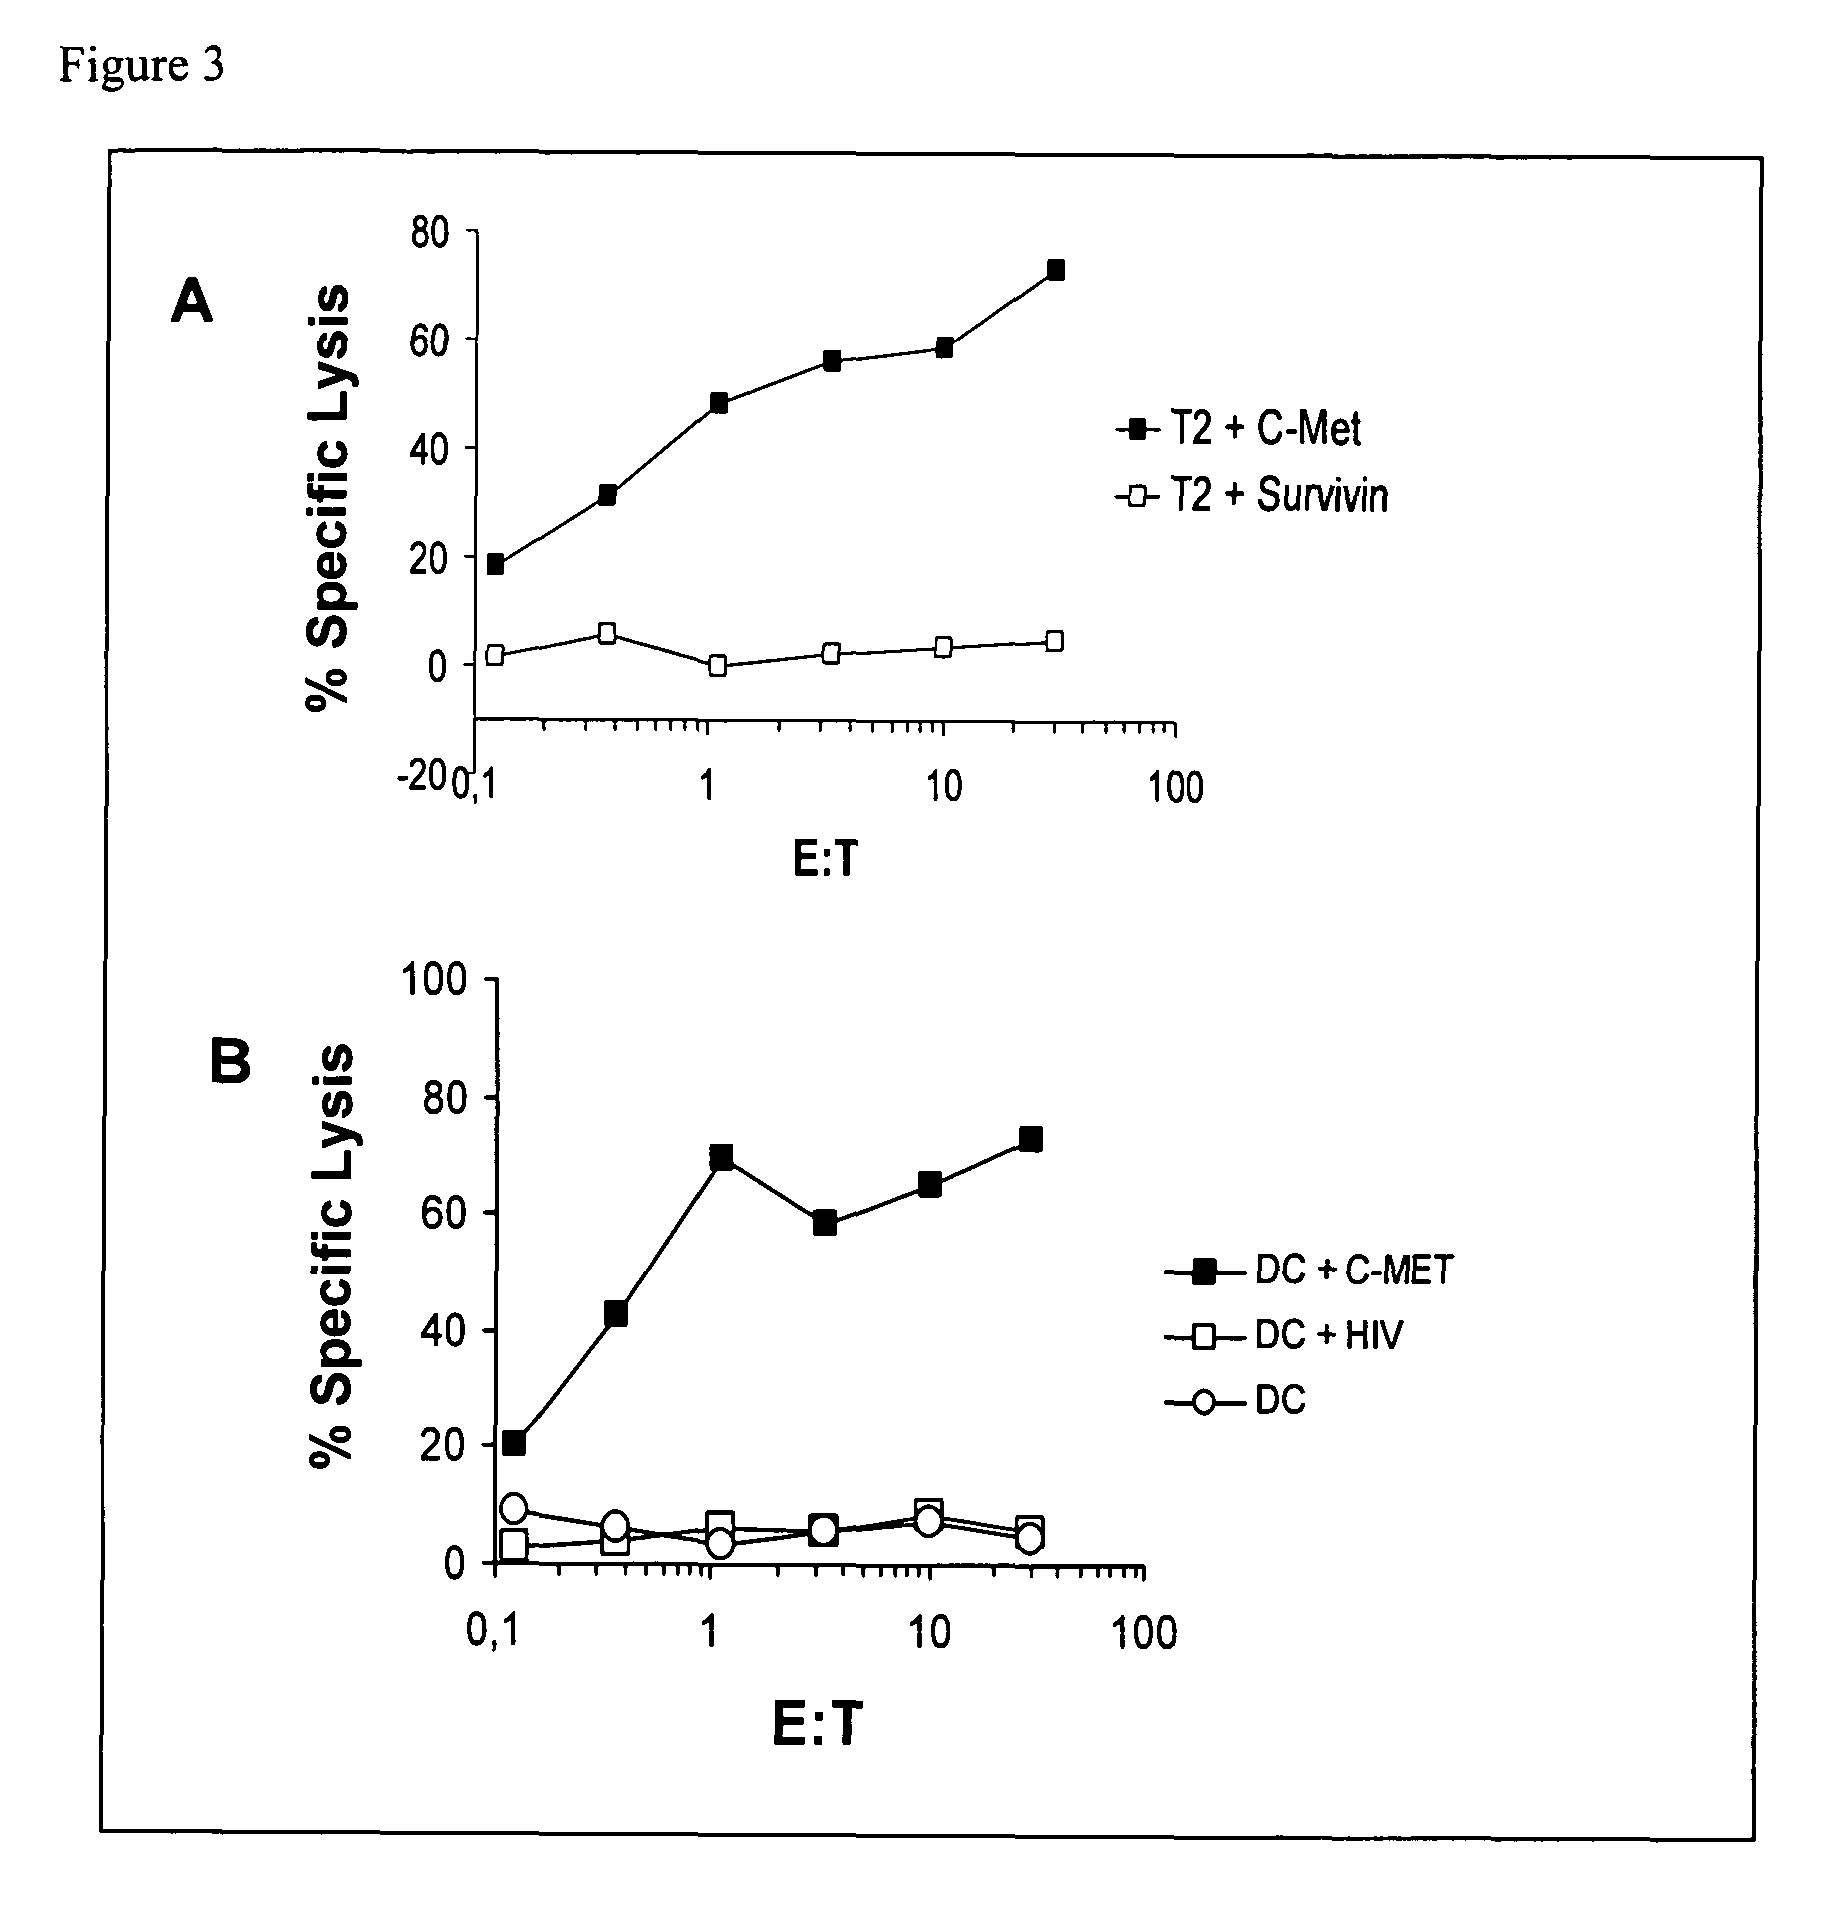 Tumour-associated peptides binding to human leukocyte antigen (HLA) class i or ii molecules and related Anti-cancer vaccine